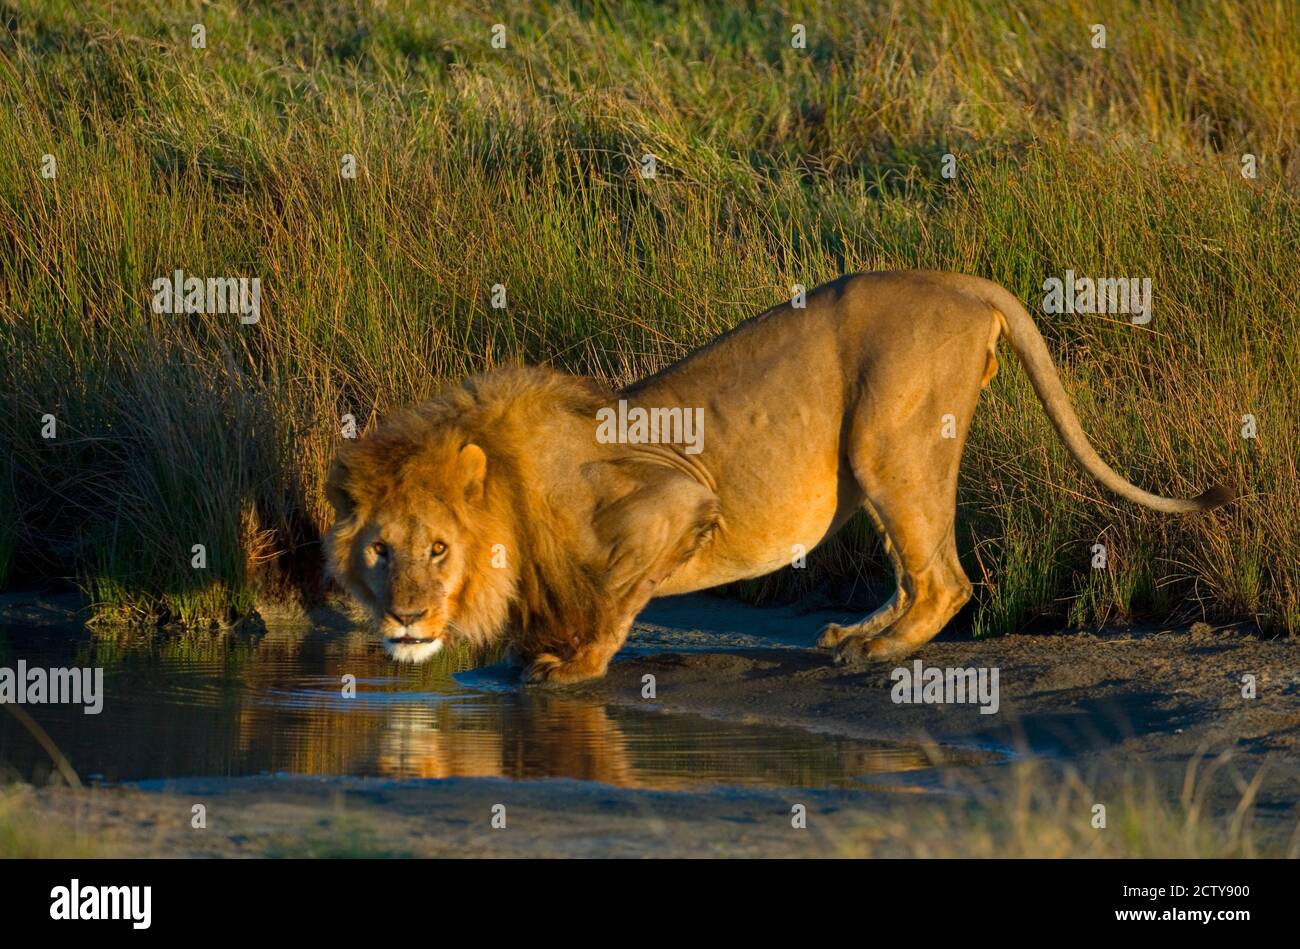 Side Profile Of A Lion Drinking Water Ngorongoro Conservation